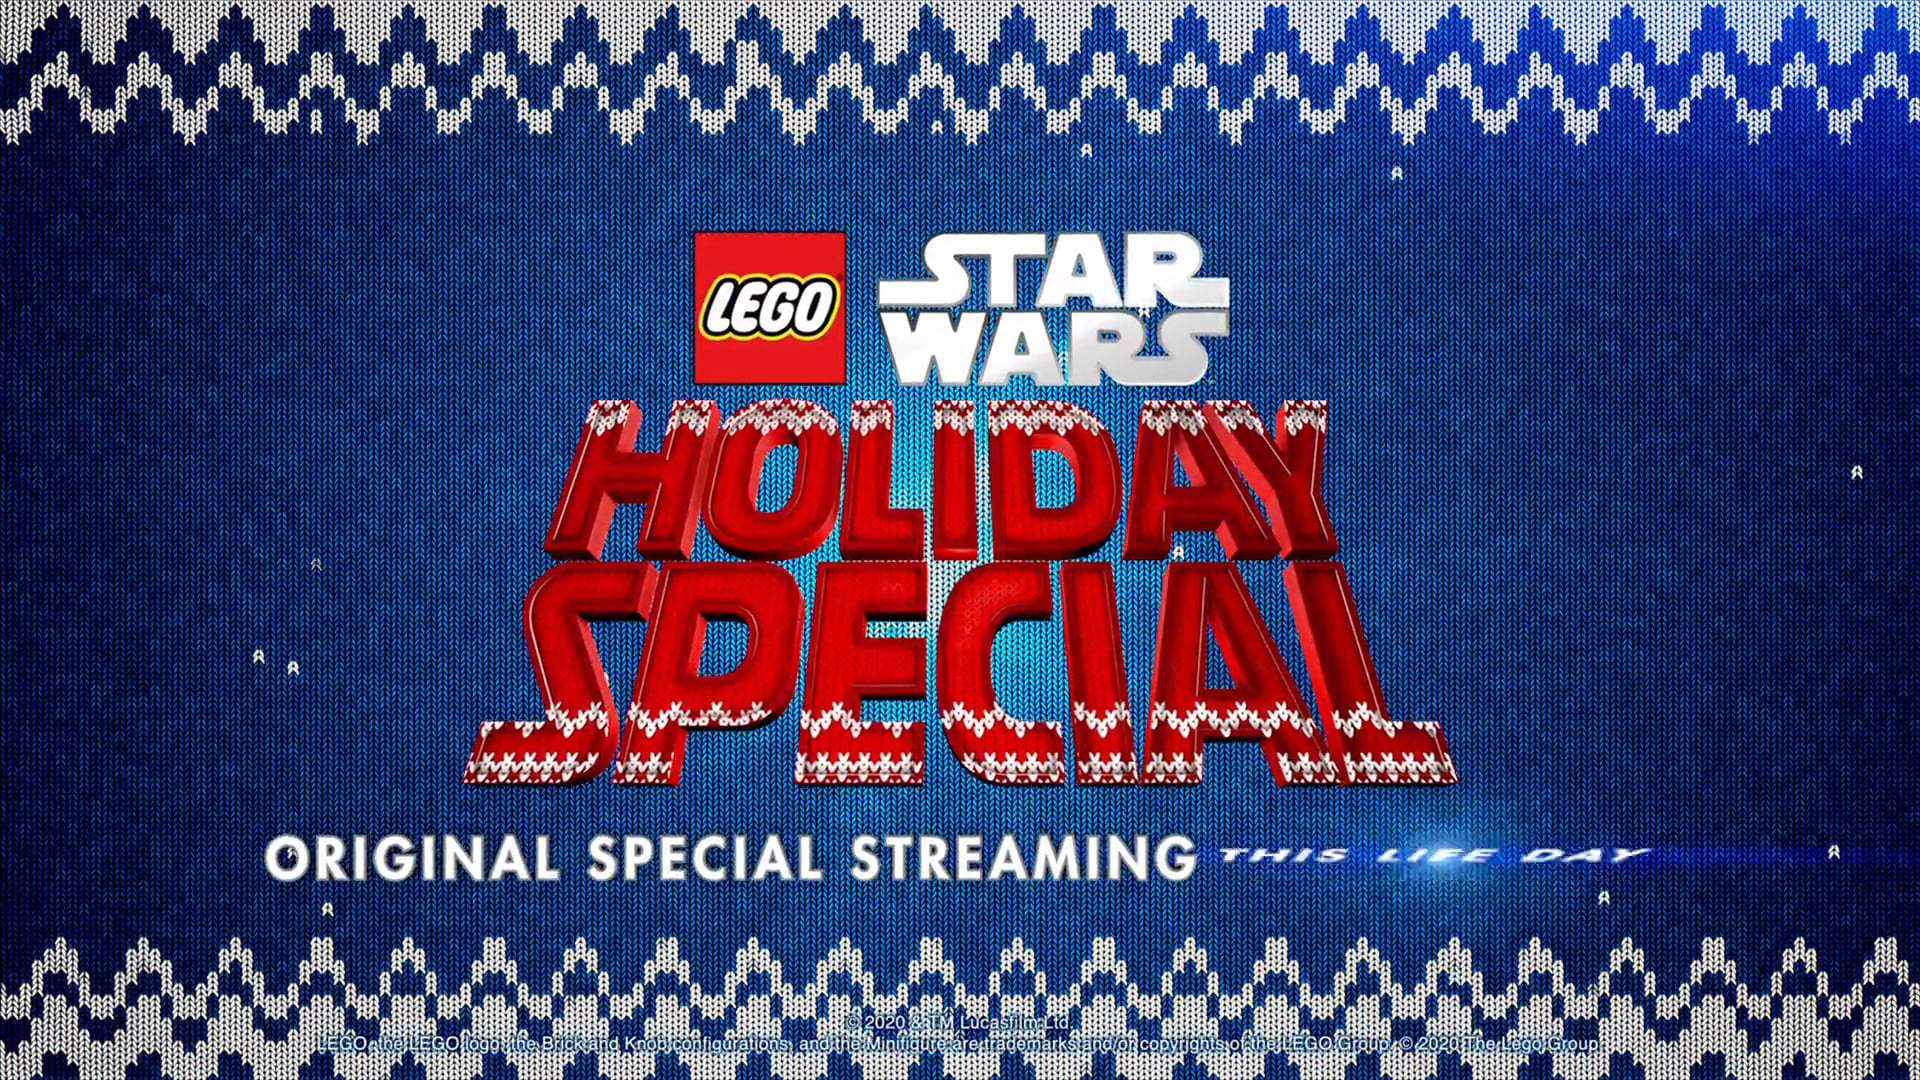 The Lego Star Wars Holiday Special Trailer (2020) Screen Capture #4